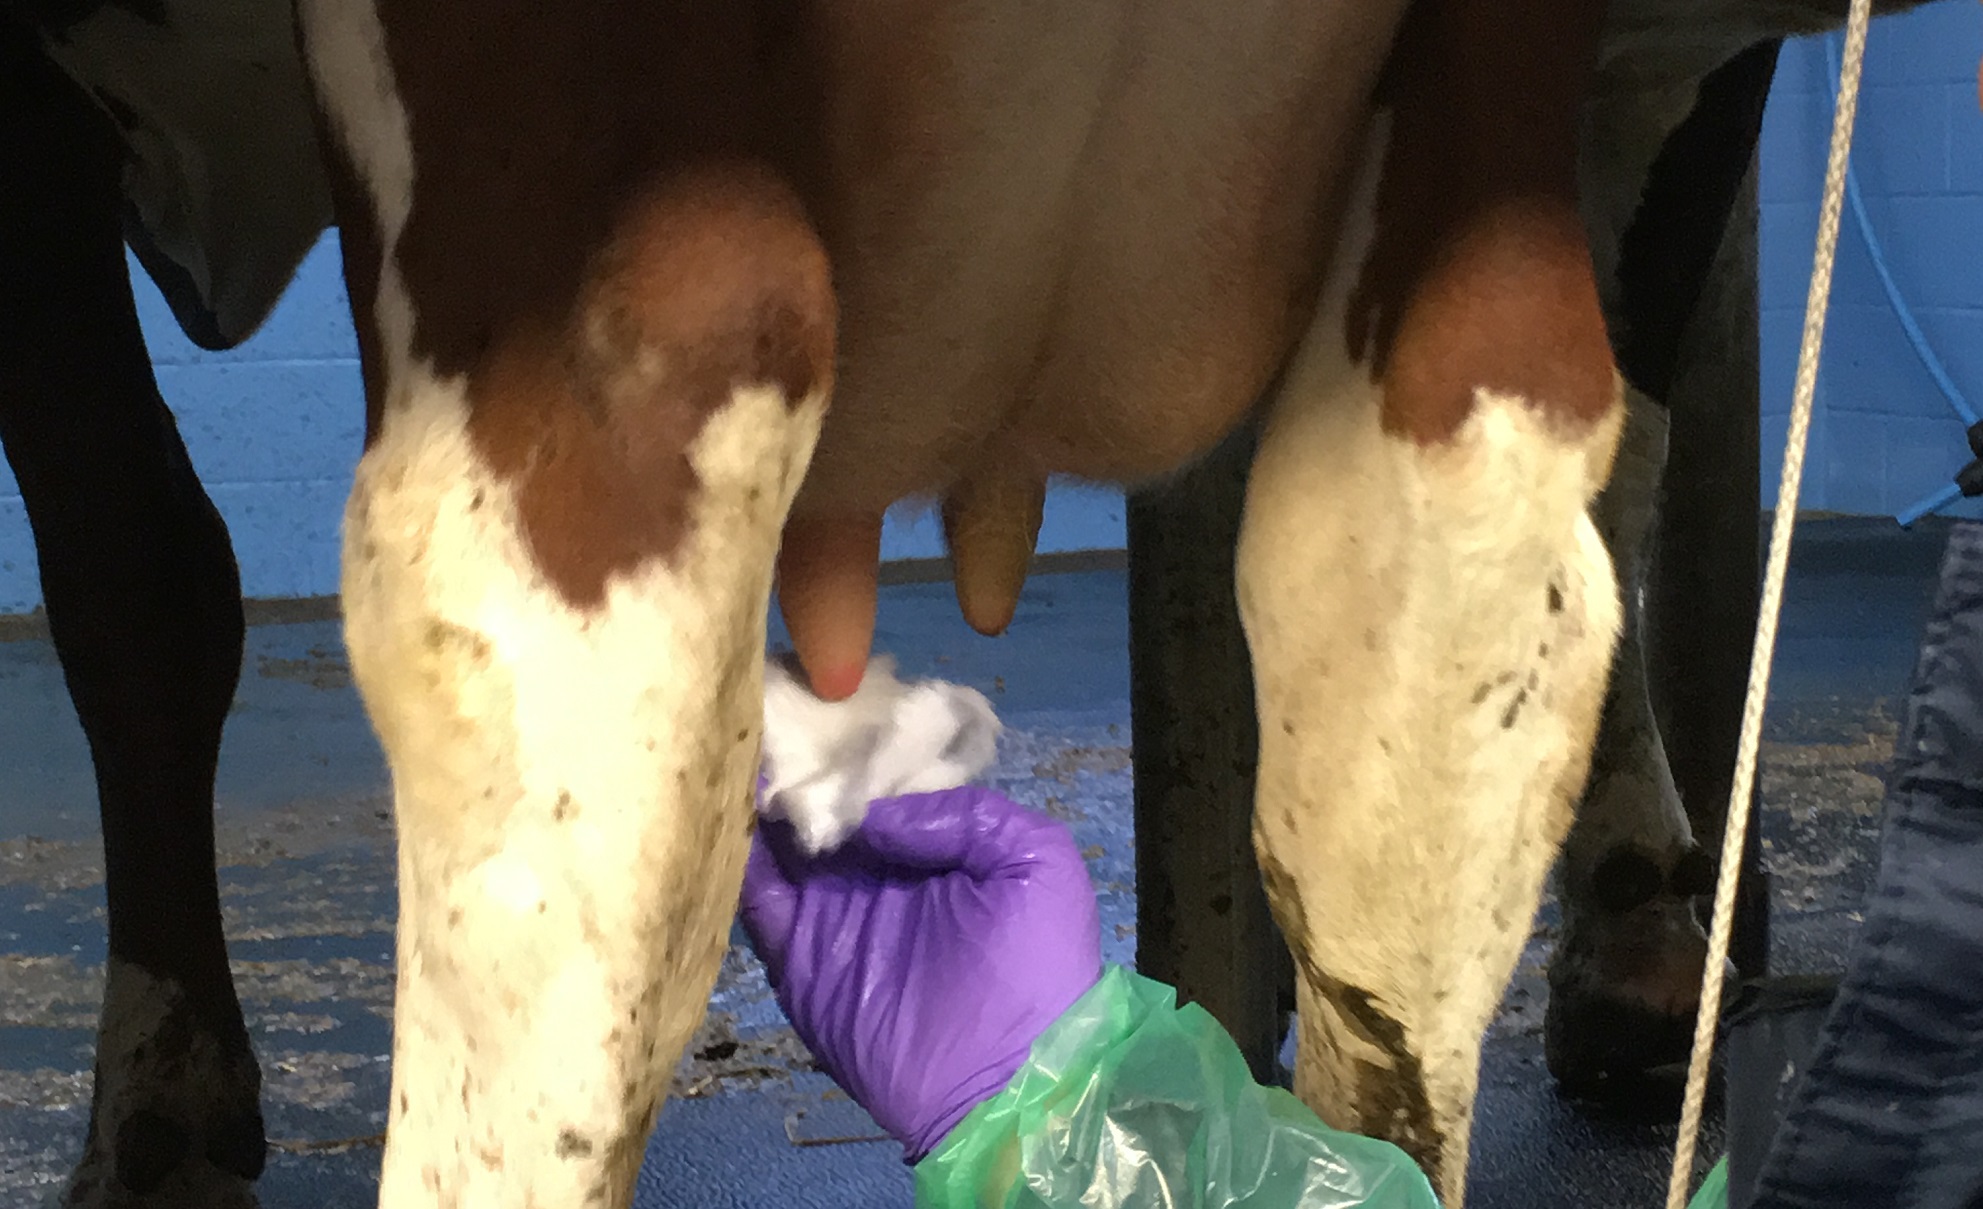 Selective dry cow therapy and processor regulation changes